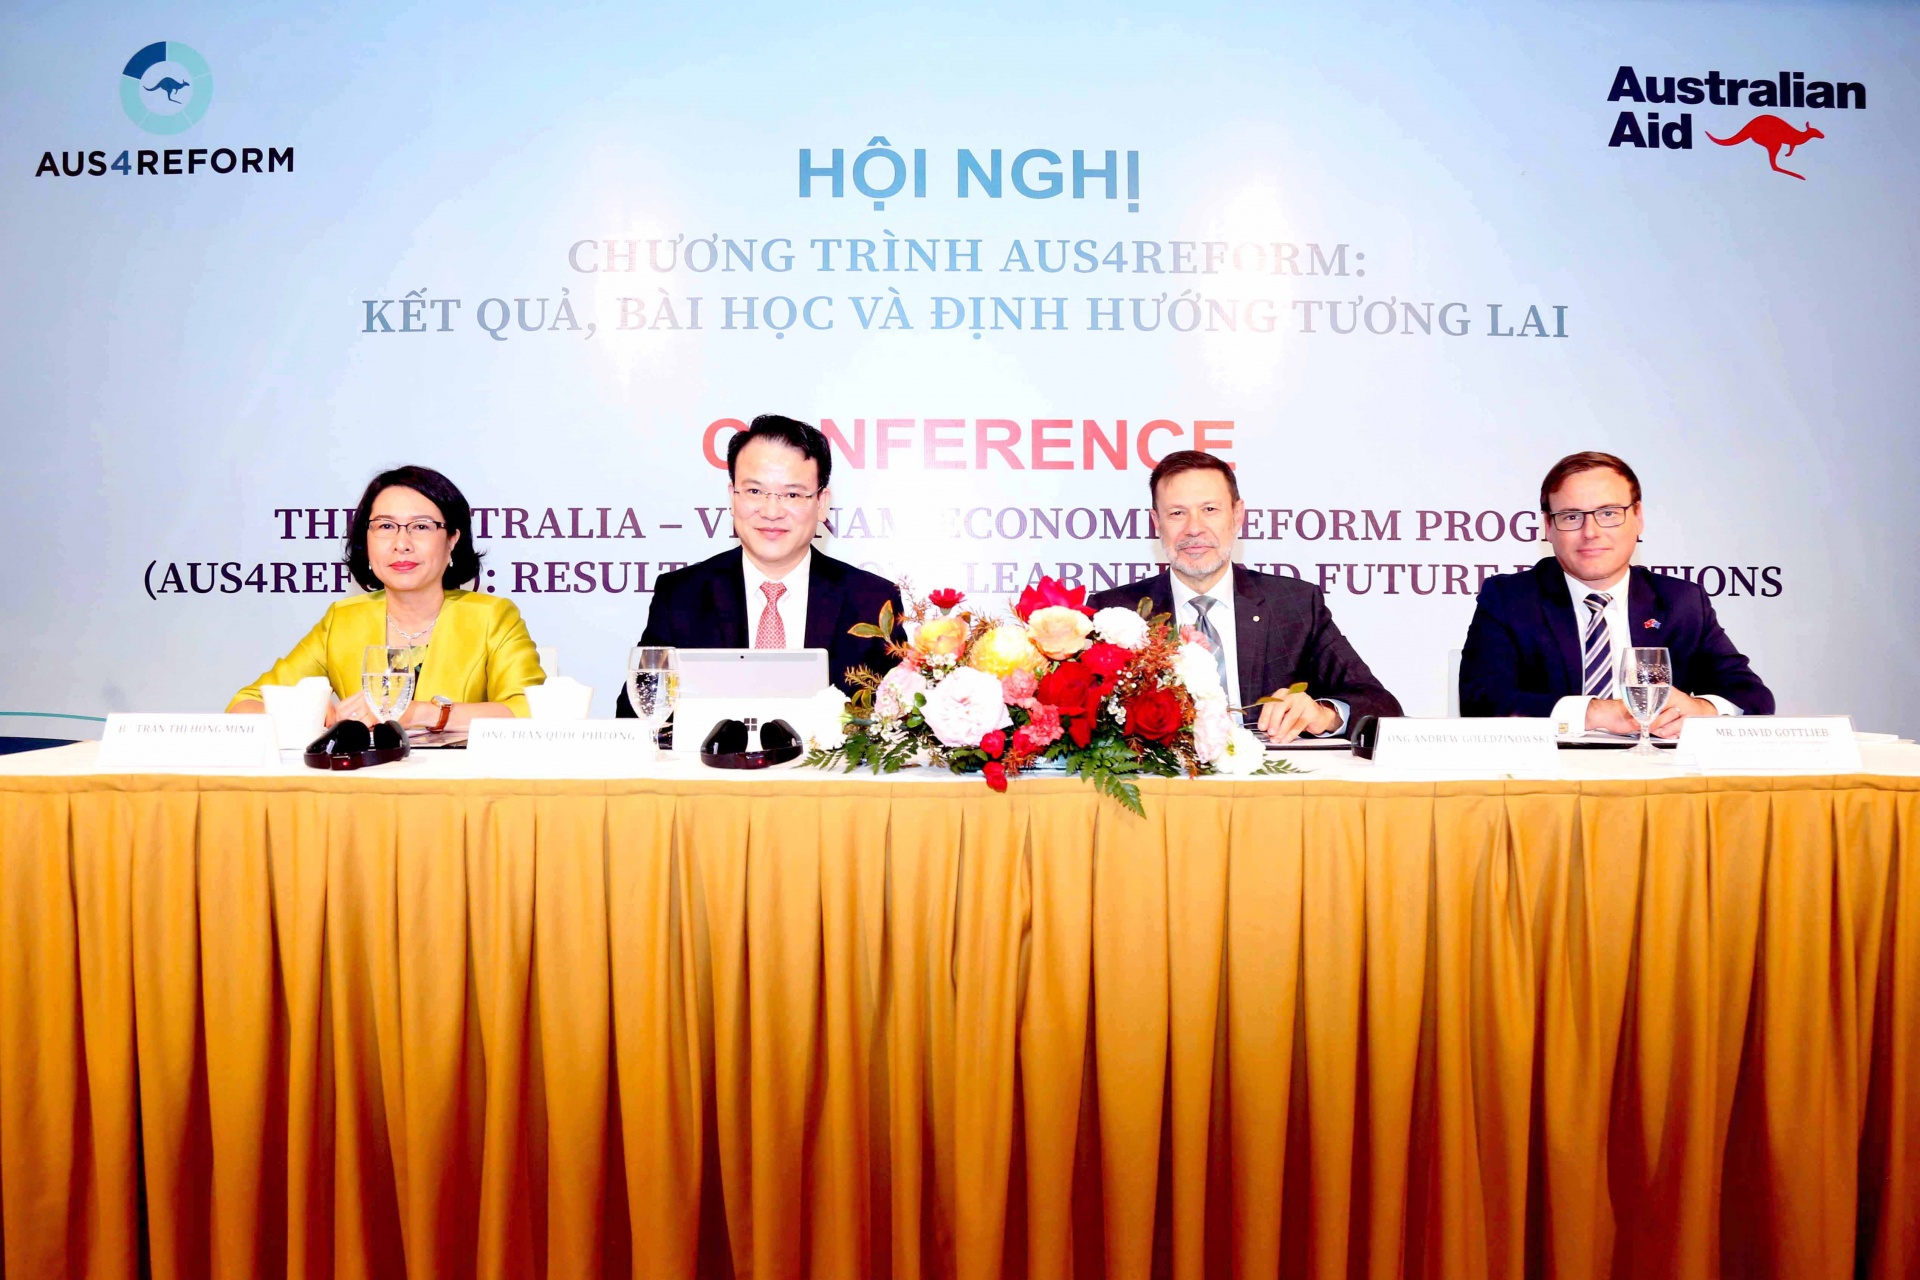 Vietnam-Australia coopeartion for the sustainable economic restructuring